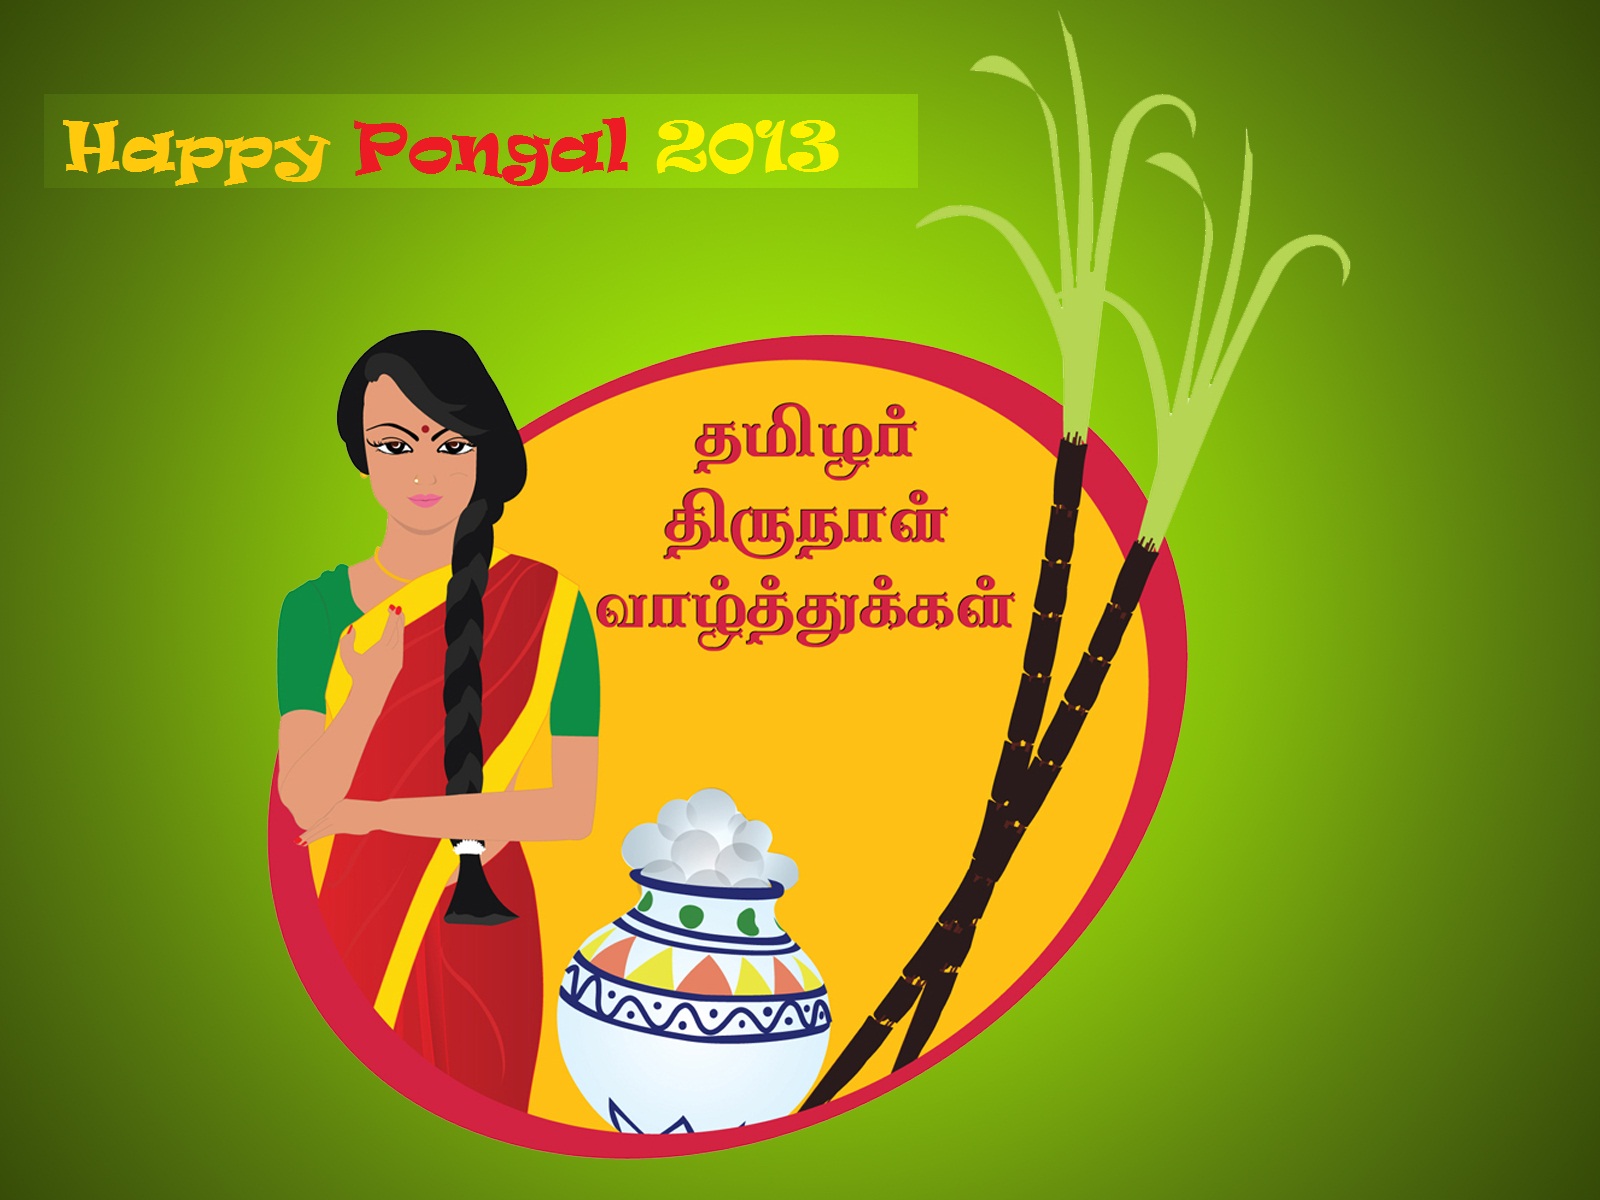 Thai Pongal 2013 Tamizhar Thirunaal Vazhthukkal And Wallpapers